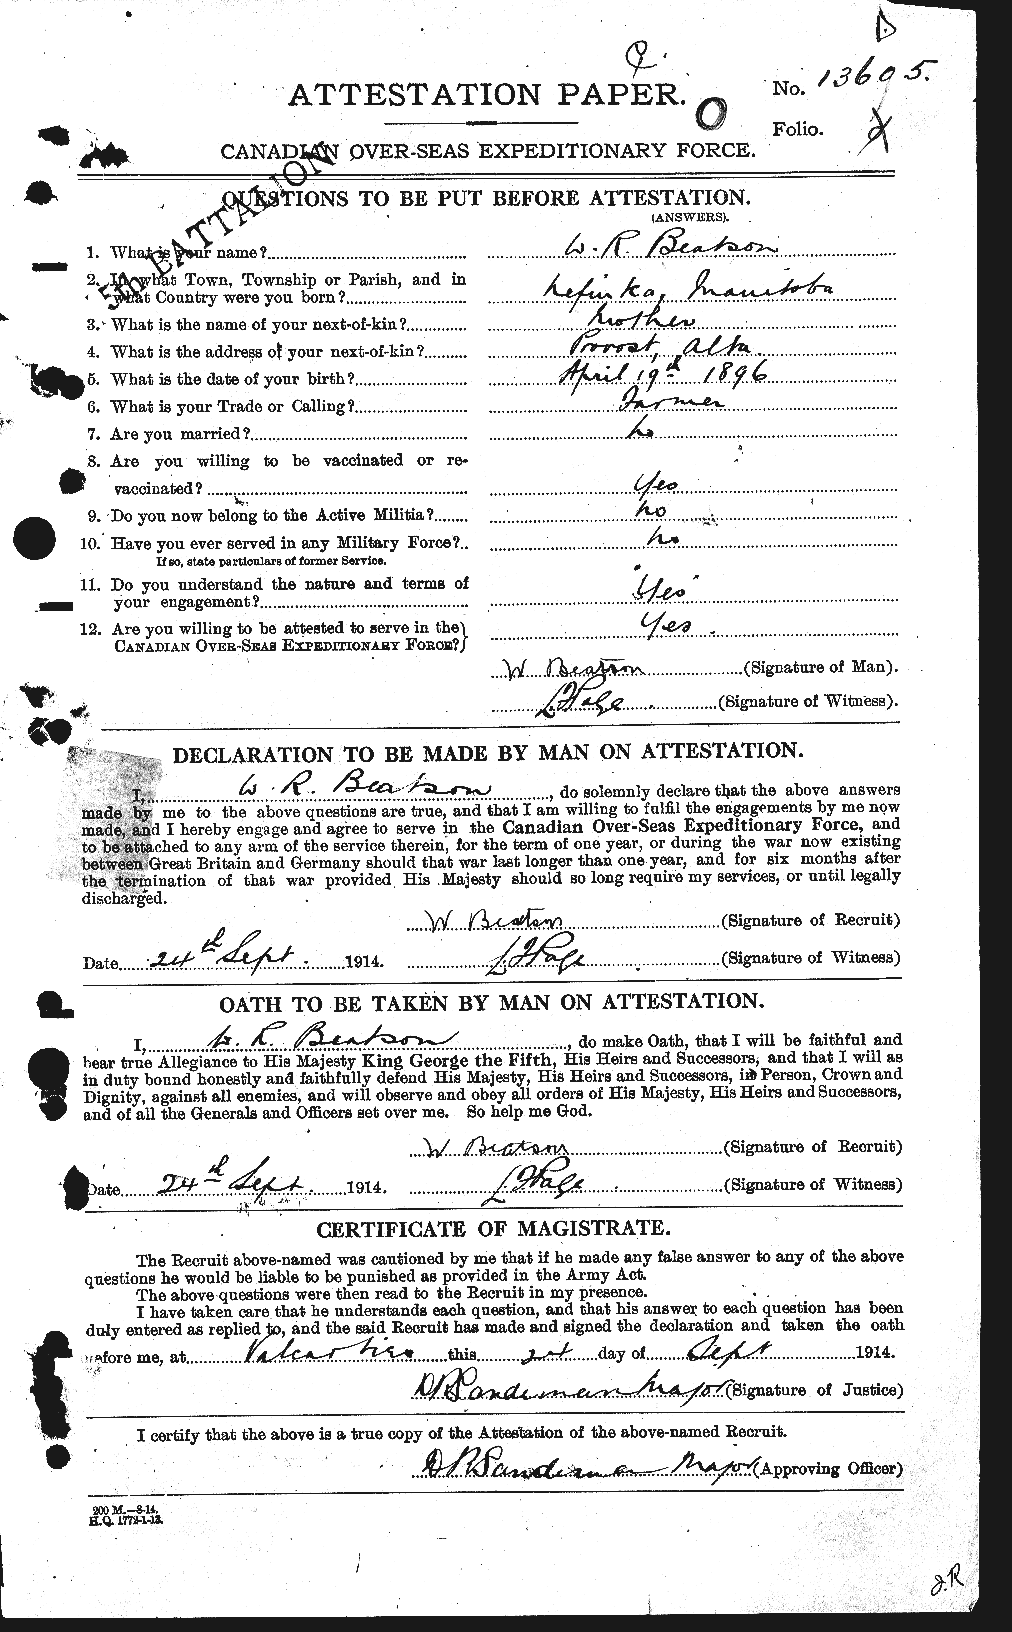 Personnel Records of the First World War - CEF 230619a